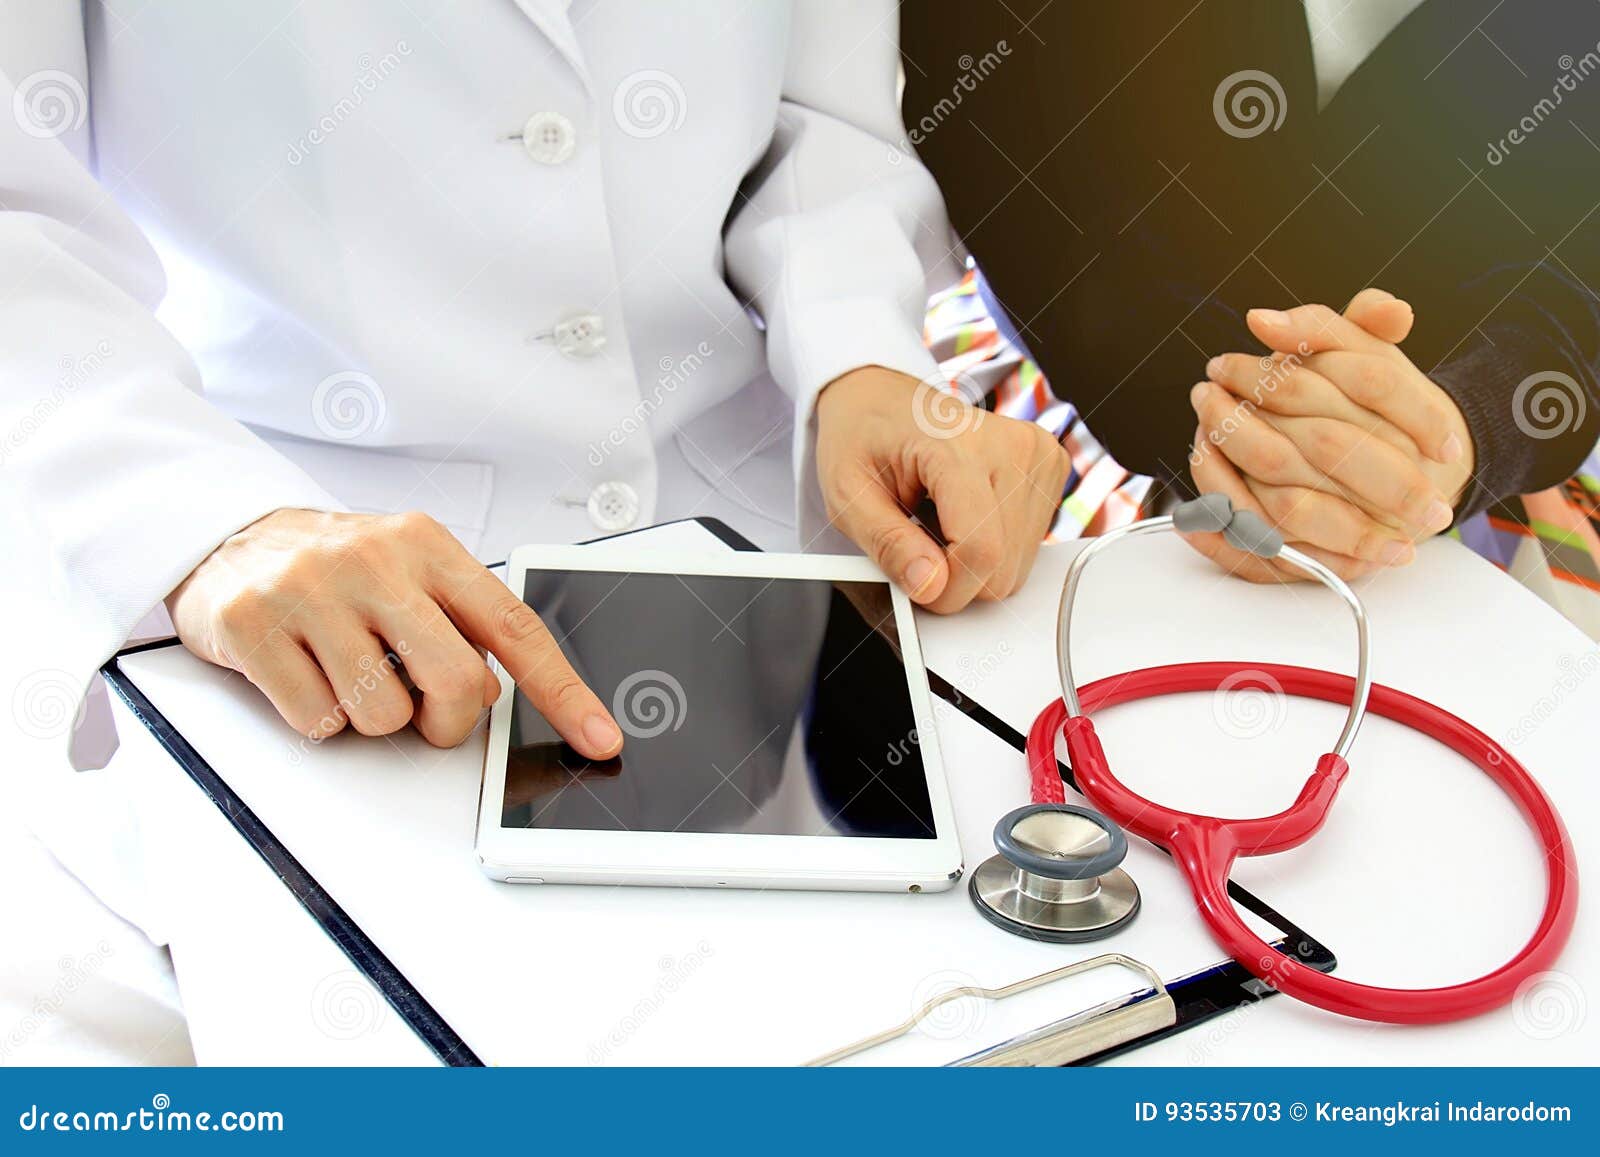 medical doctor discusses with patient about the health examination results by using tablet computer.